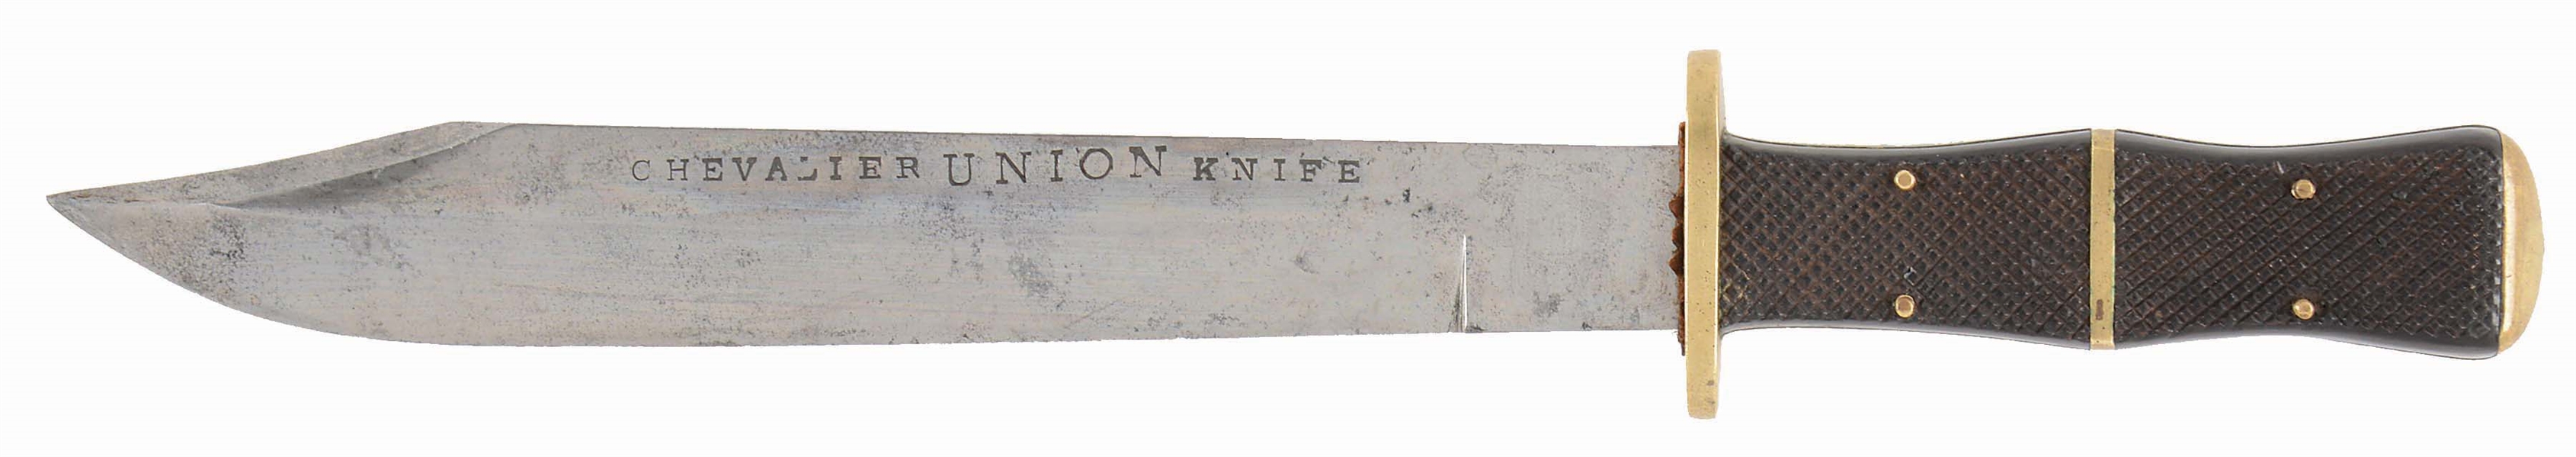 CHEVELIER "DEATH TO TRAITORS" BOWIE KNIFE.